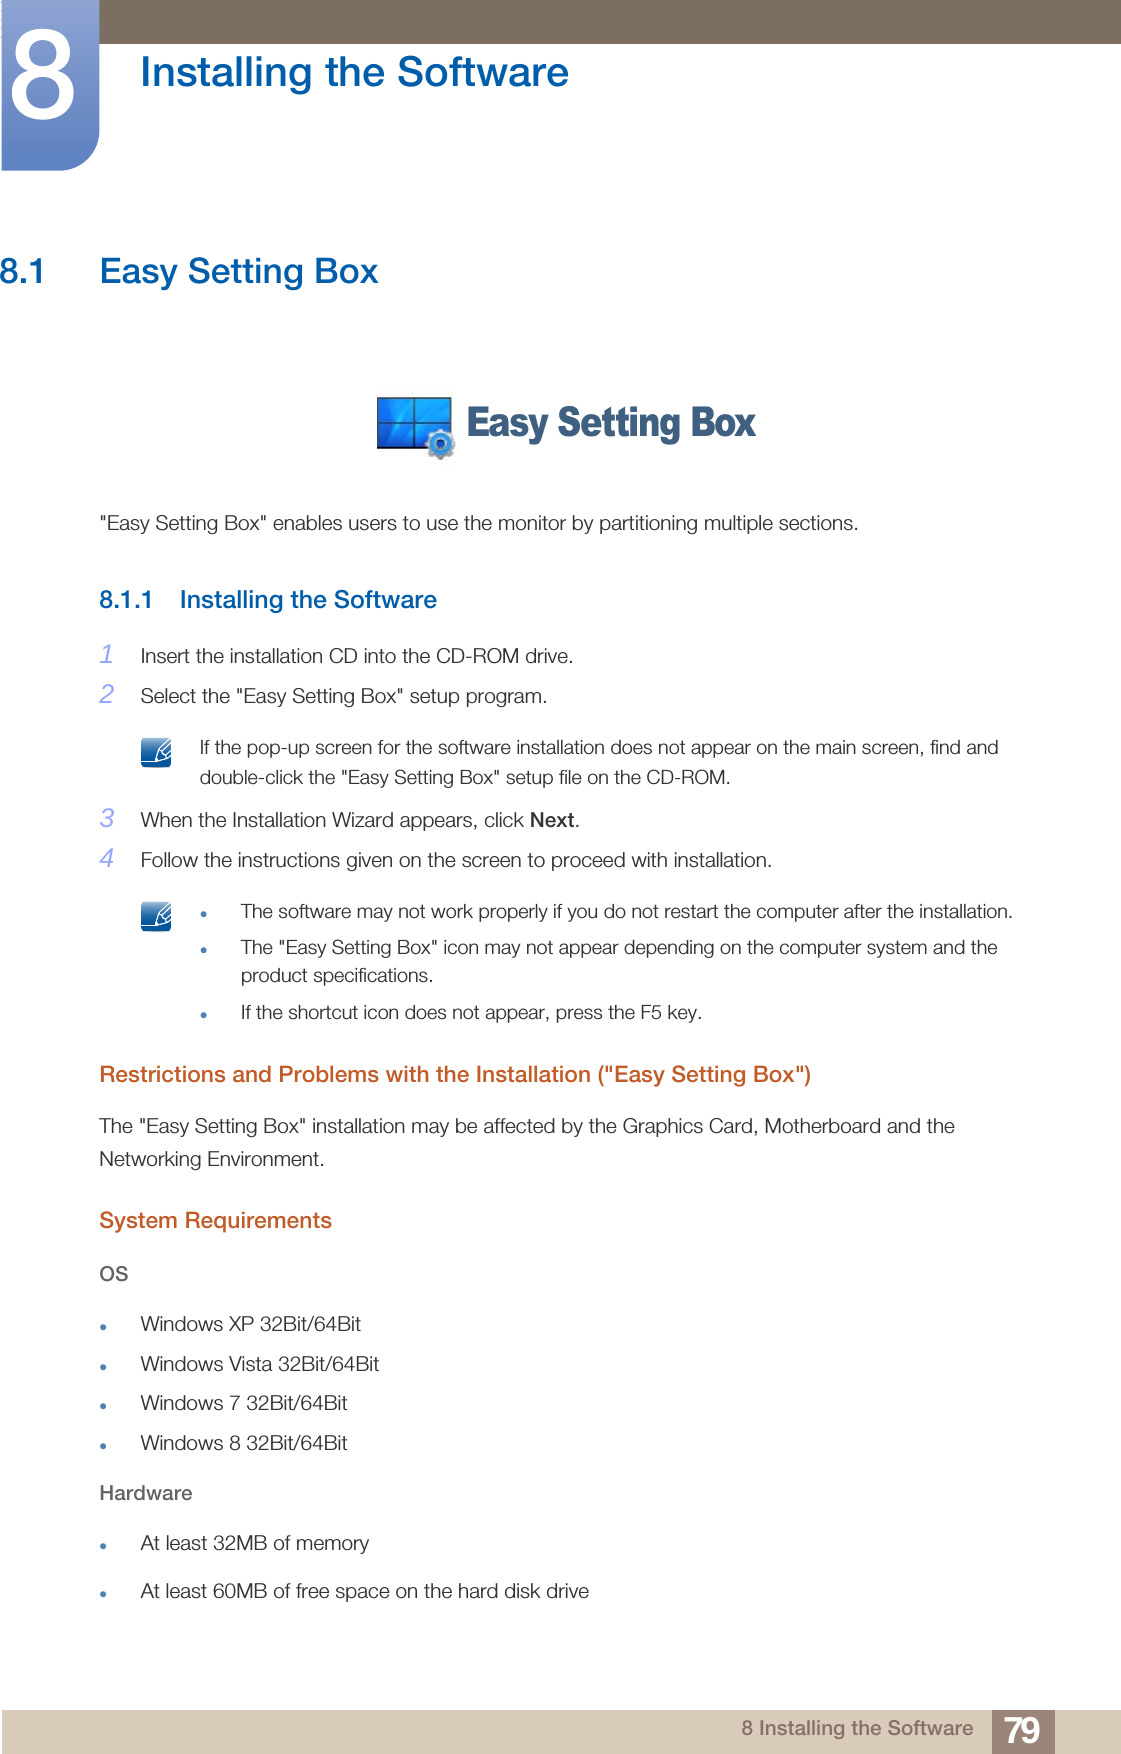 798 Installing the Software8  Installing the Software8.1 Easy Setting Box&quot;Easy Setting Box&quot; enables users to use the monitor by partitioning multiple sections.8.1.1 Installing the Software1Insert the installation CD into the CD-ROM drive.2Select the &quot;Easy Setting Box&quot; setup program. If the pop-up screen for the software installation does not appear on the main screen, find and double-click the &quot;Easy Setting Box&quot; setup file on the CD-ROM. 3When the Installation Wizard appears, click Next.4Follow the instructions given on the screen to proceed with installation. The software may not work properly if you do not restart the computer after the installation.The &quot;Easy Setting Box&quot; icon may not appear depending on the computer system and the product specifications.If the shortcut icon does not appear, press the F5 key. Restrictions and Problems with the Installation (&quot;Easy Setting Box&quot;)The &quot;Easy Setting Box&quot; installation may be affected by the Graphics Card, Motherboard and the Networking Environment.System RequirementsOSWindows XP 32Bit/64BitWindows Vista 32Bit/64BitWindows 7 32Bit/64BitWindows 8 32Bit/64BitHardwareAt least 32MB of memoryAt least 60MB of free space on the hard disk driveEasy Setting Box